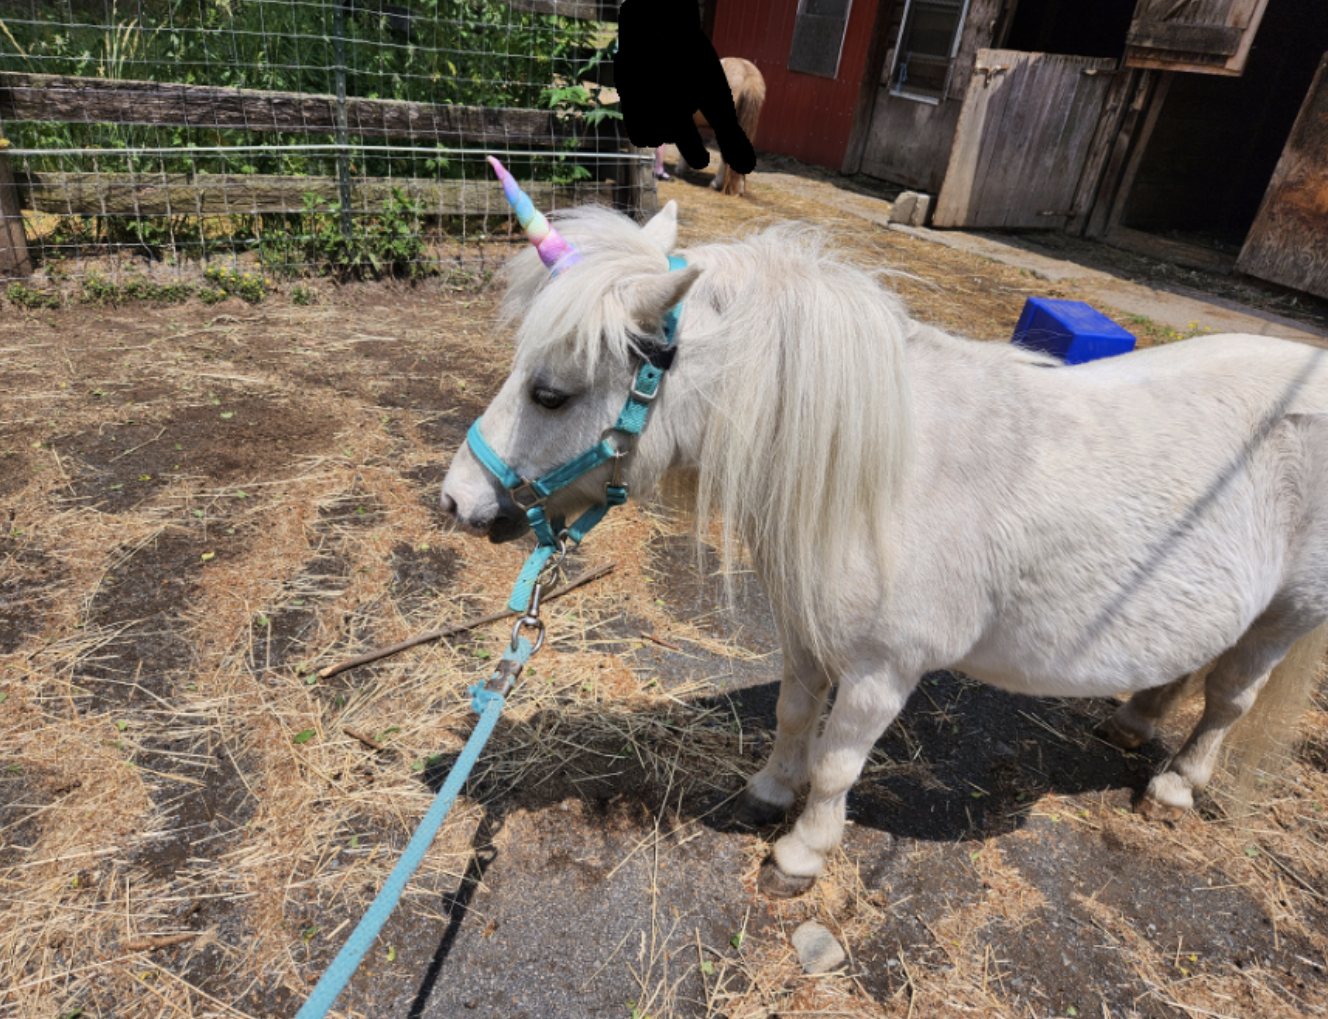 A mini pony wearing a unicorn horn is being walked